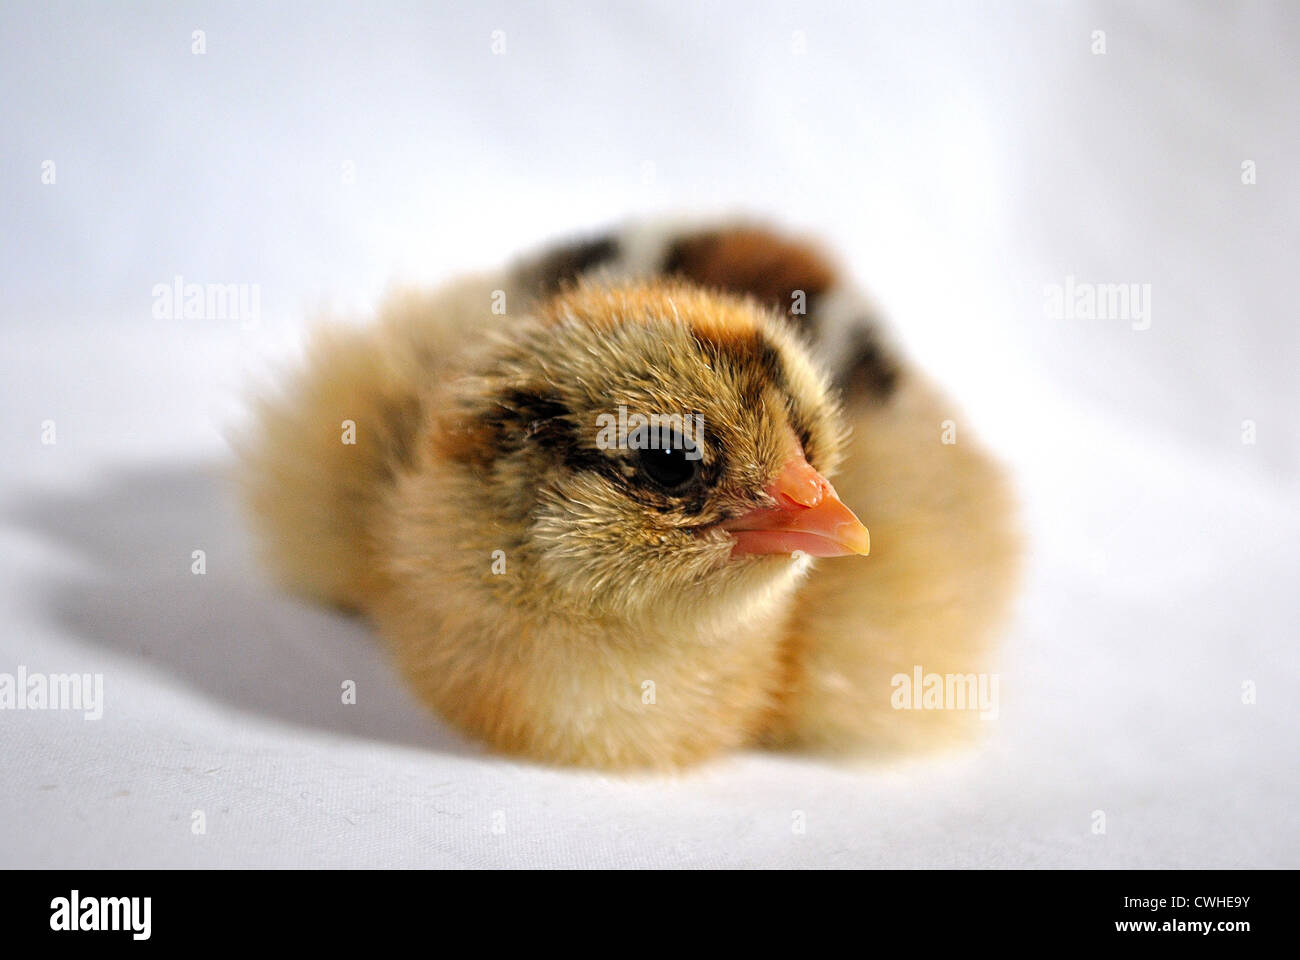 Gold Brahma one day old chick Stock Photo